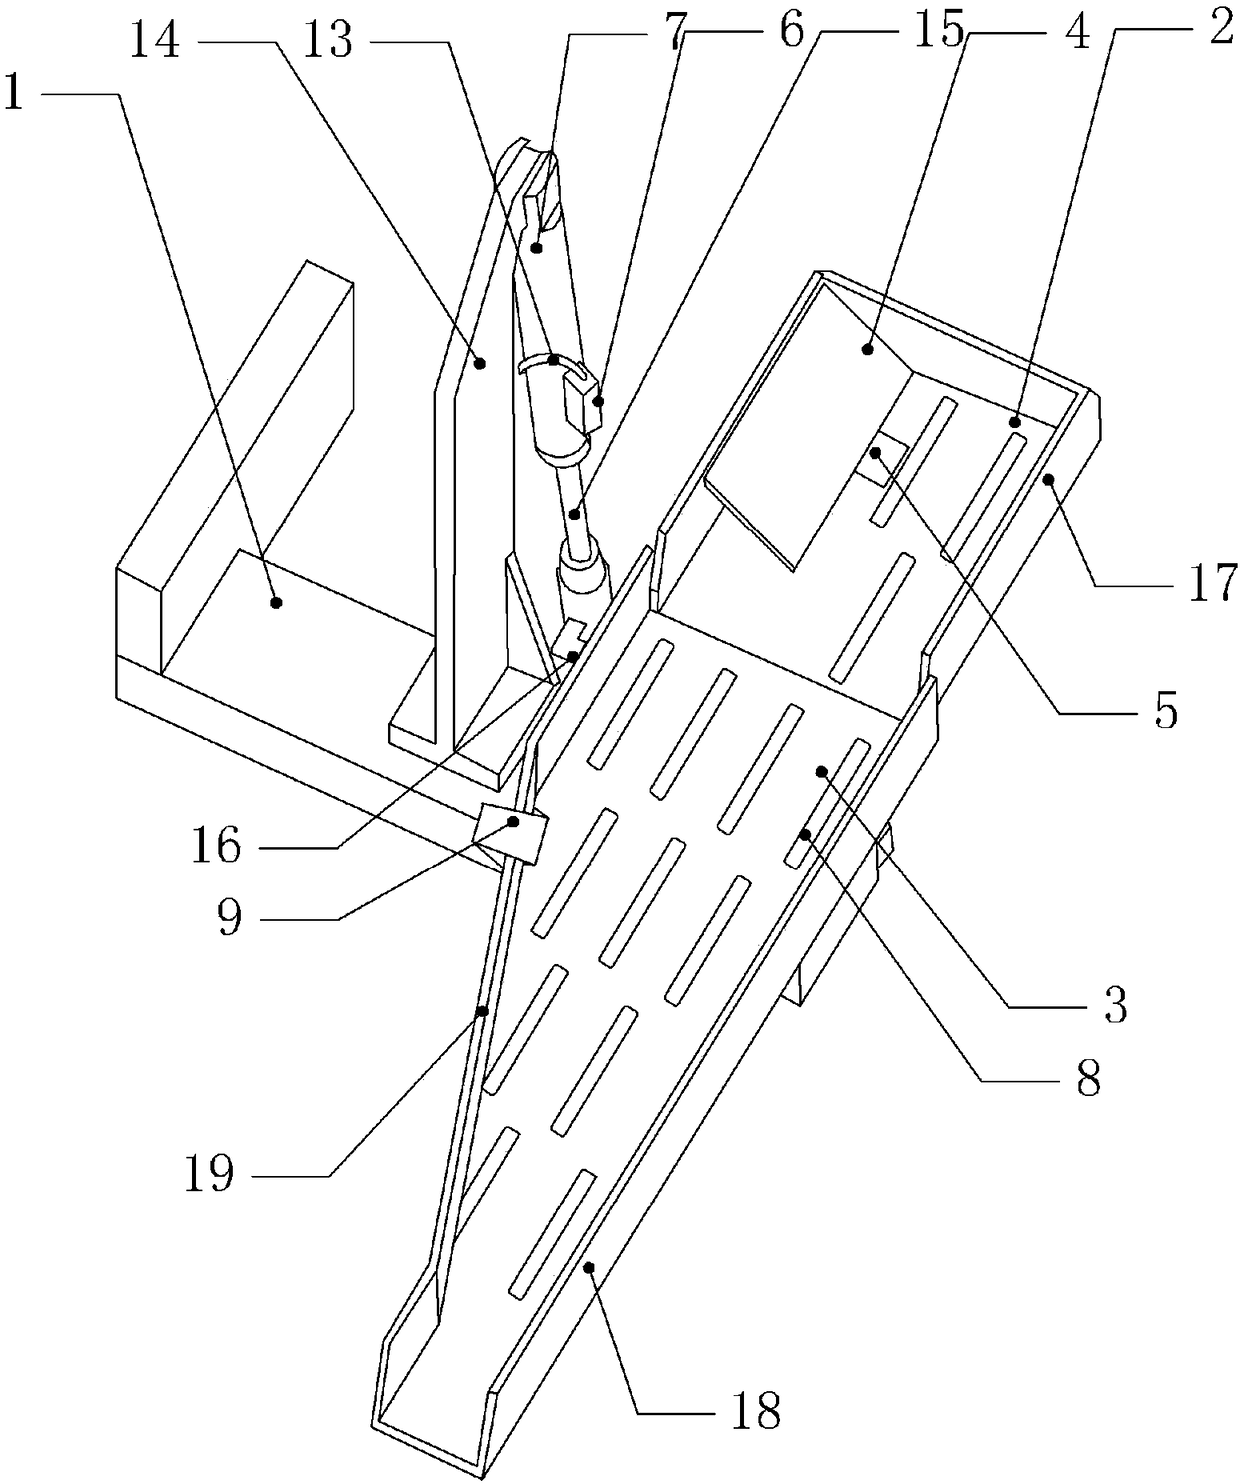 Pierced type material receiving device with machine tool material removal function